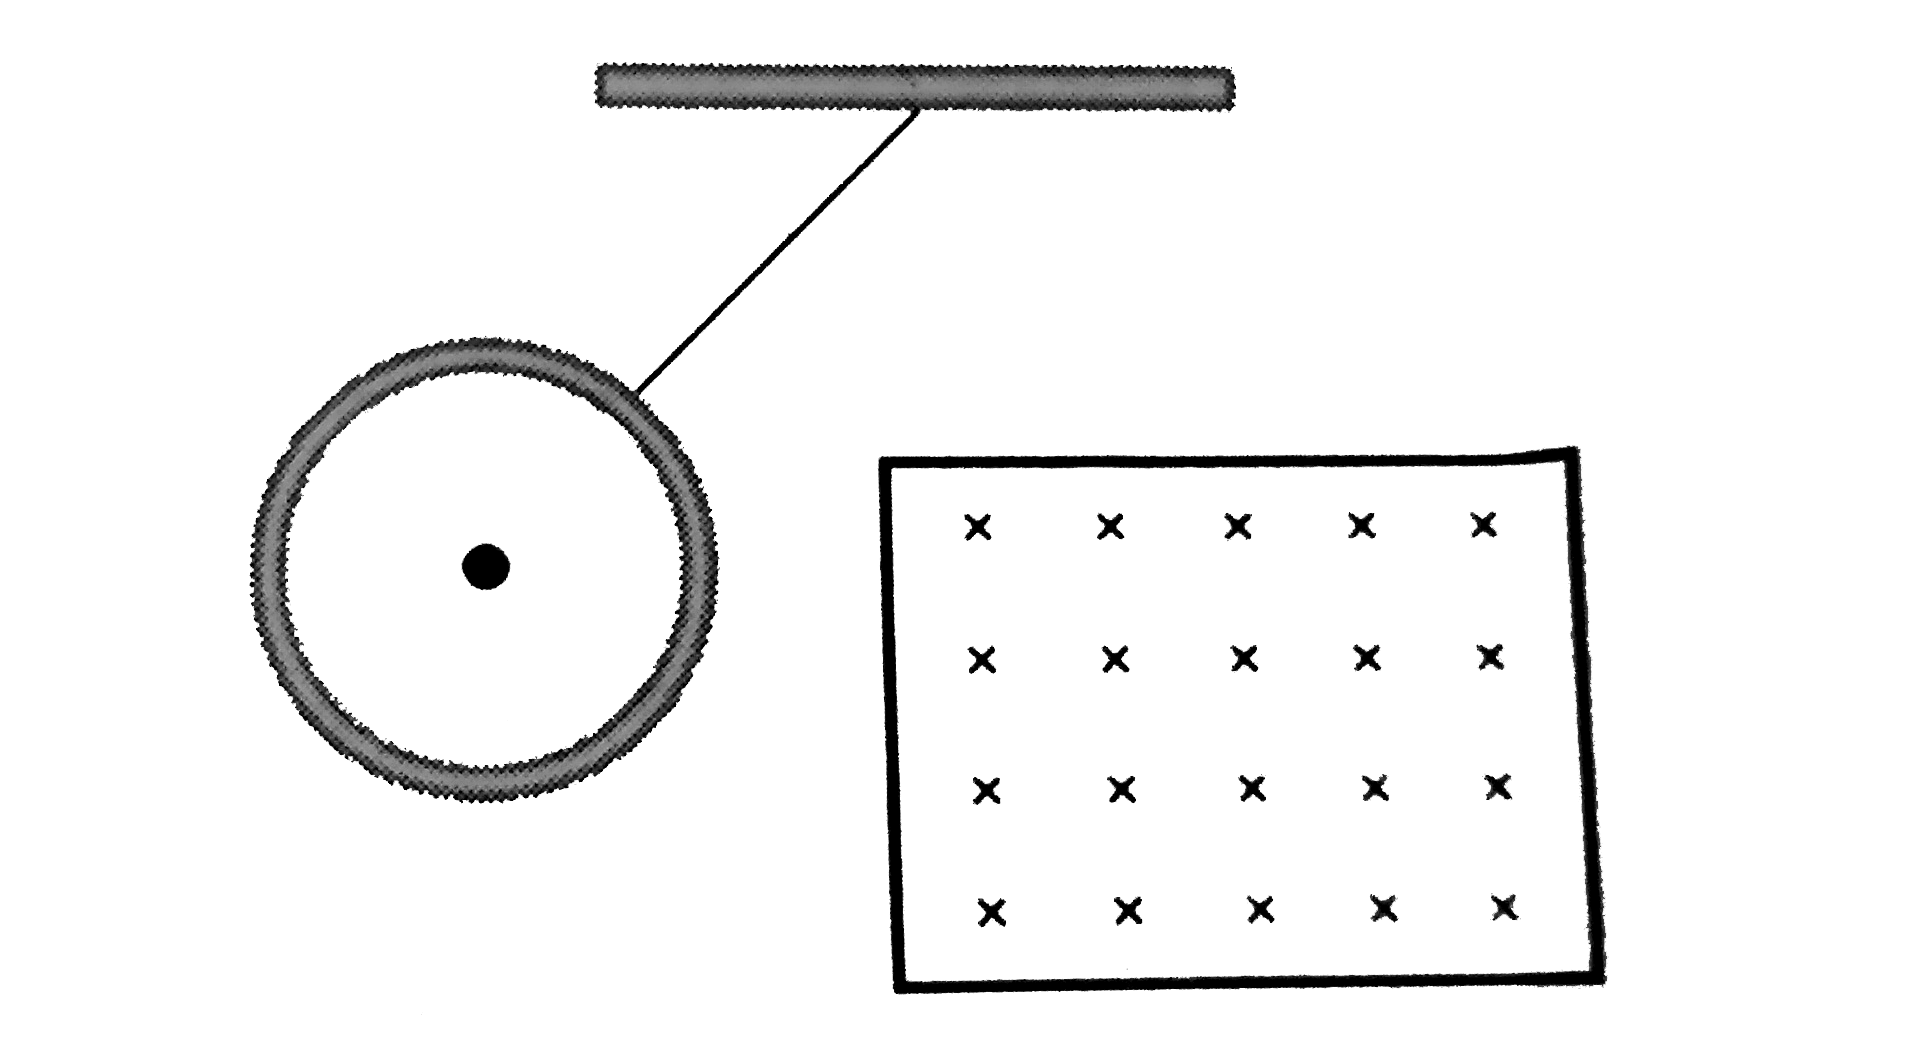 A metalic ring connected to a rod oscillates freely like a pendulum. If now a magnetic field is applied in horizontal diection so that the pendulum now swings through the field, the pendulum will